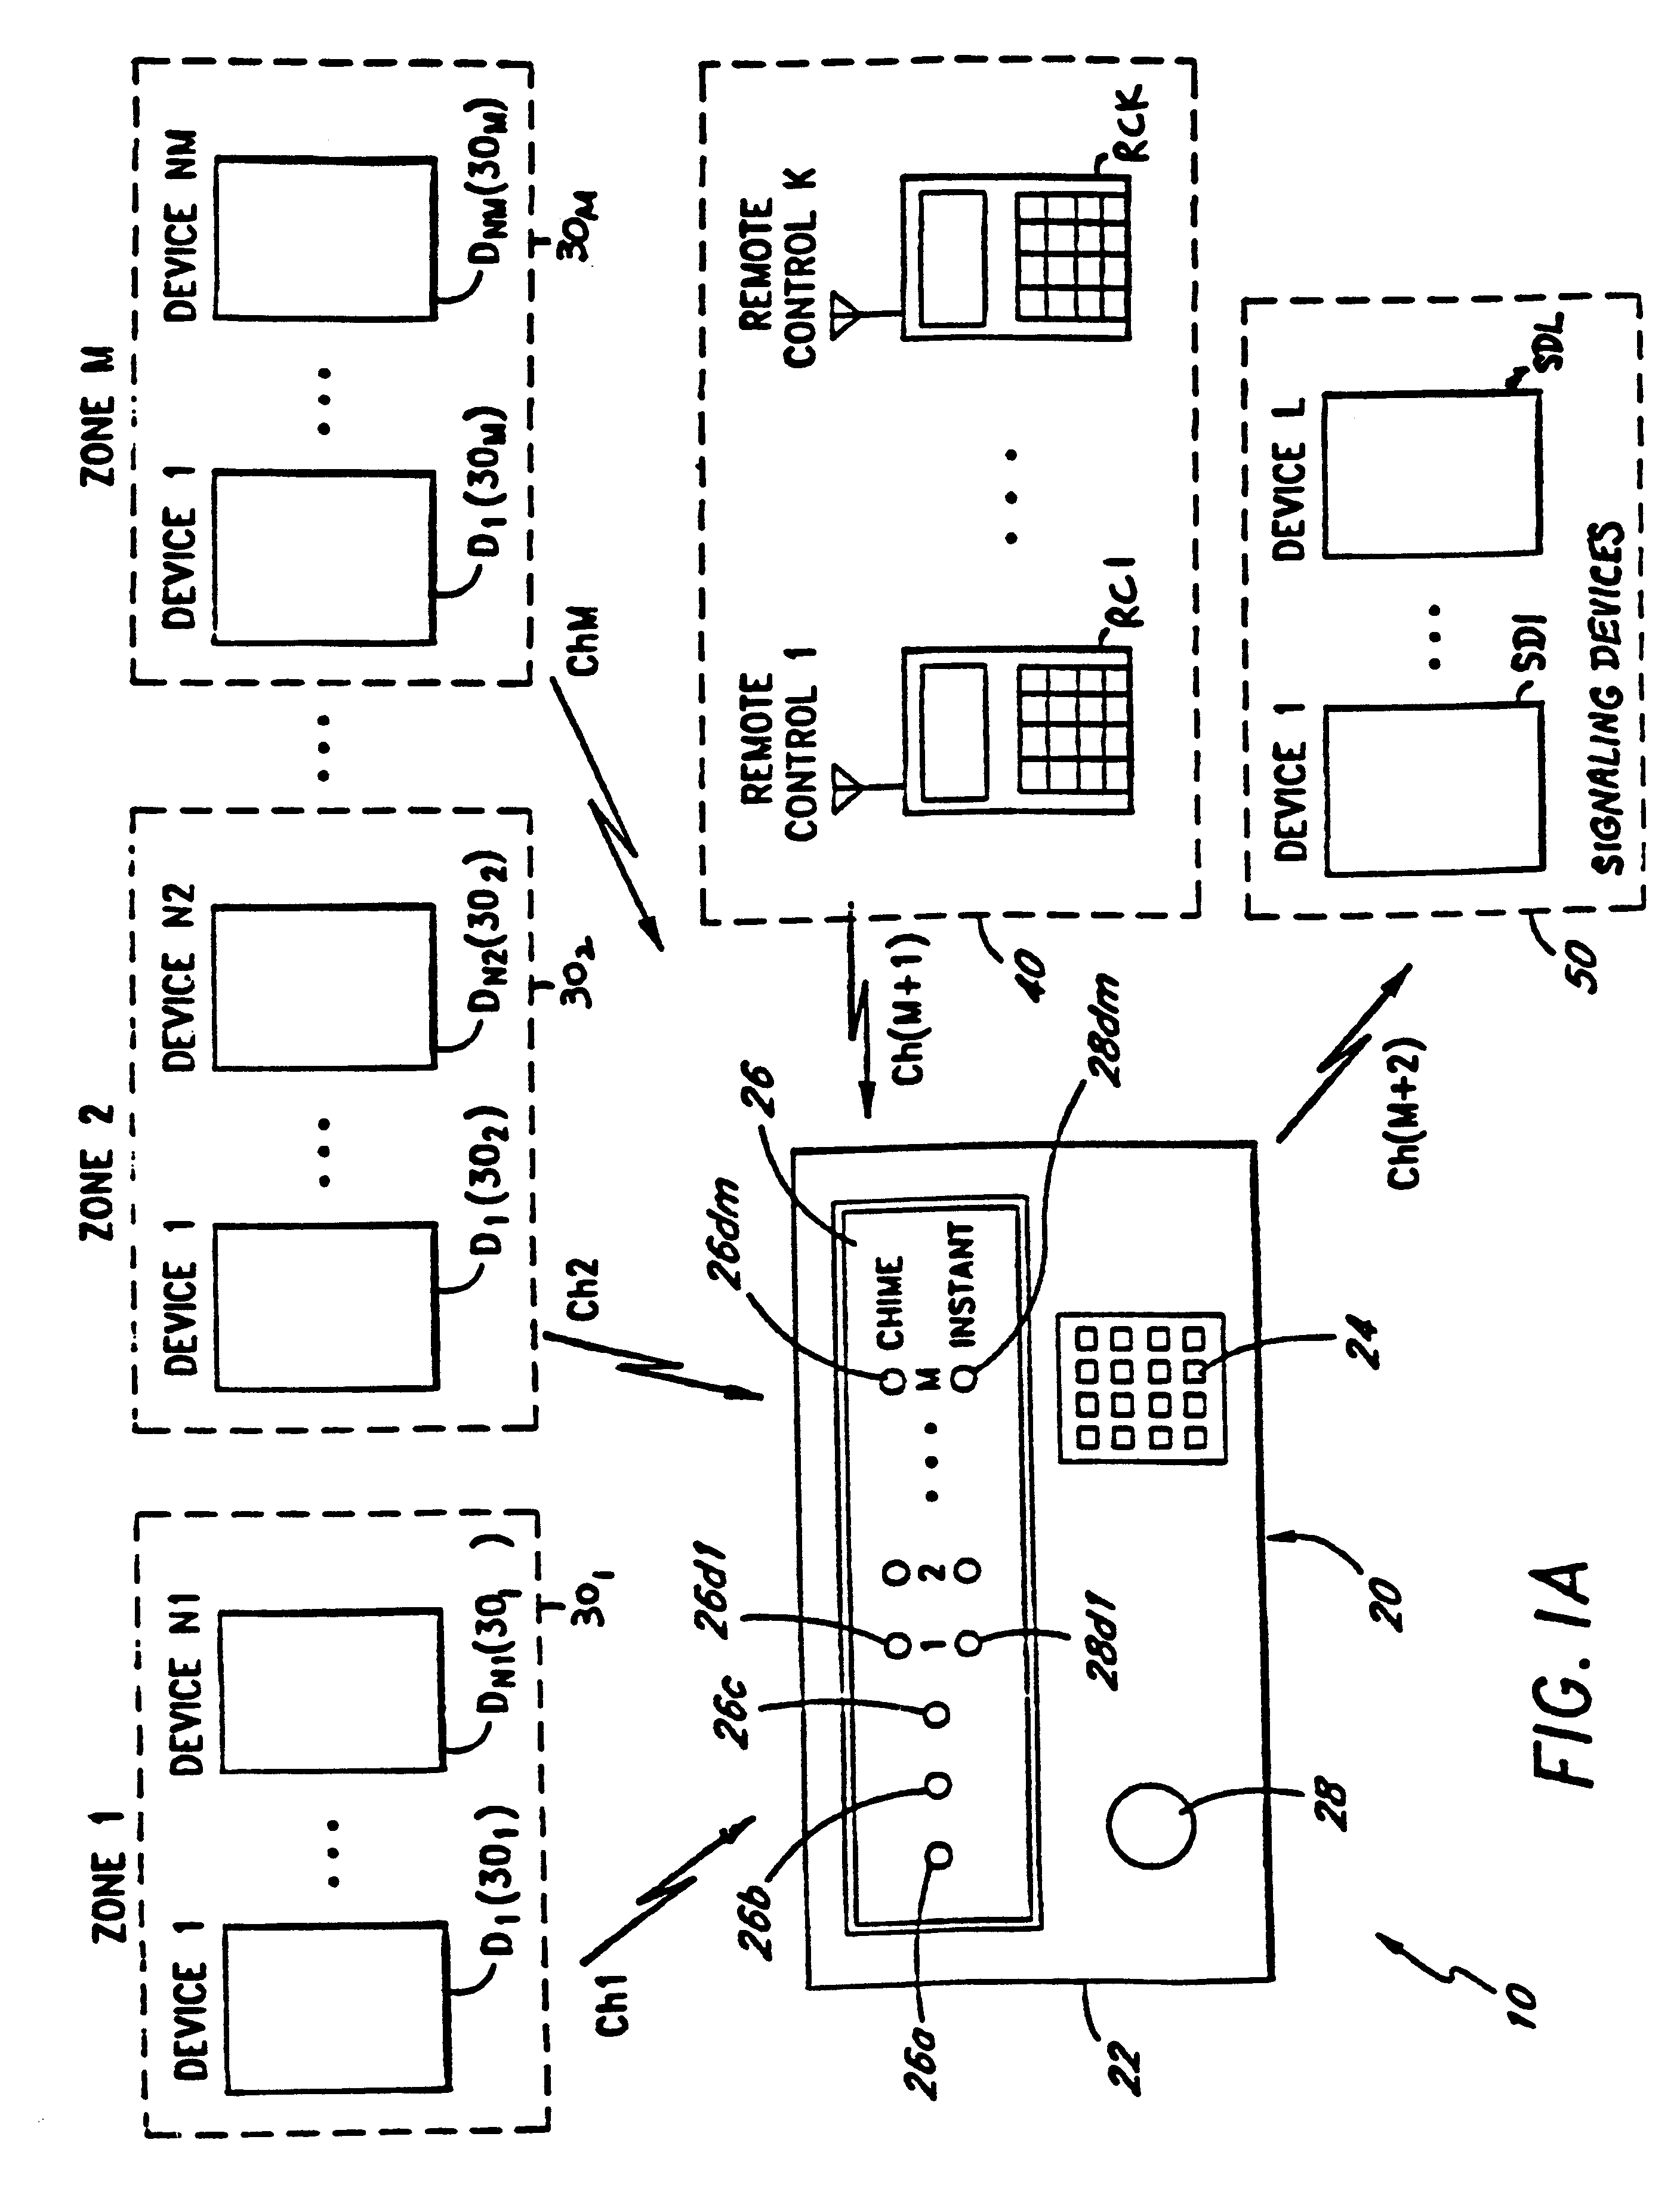 Remote signaling device for a rolling code security system